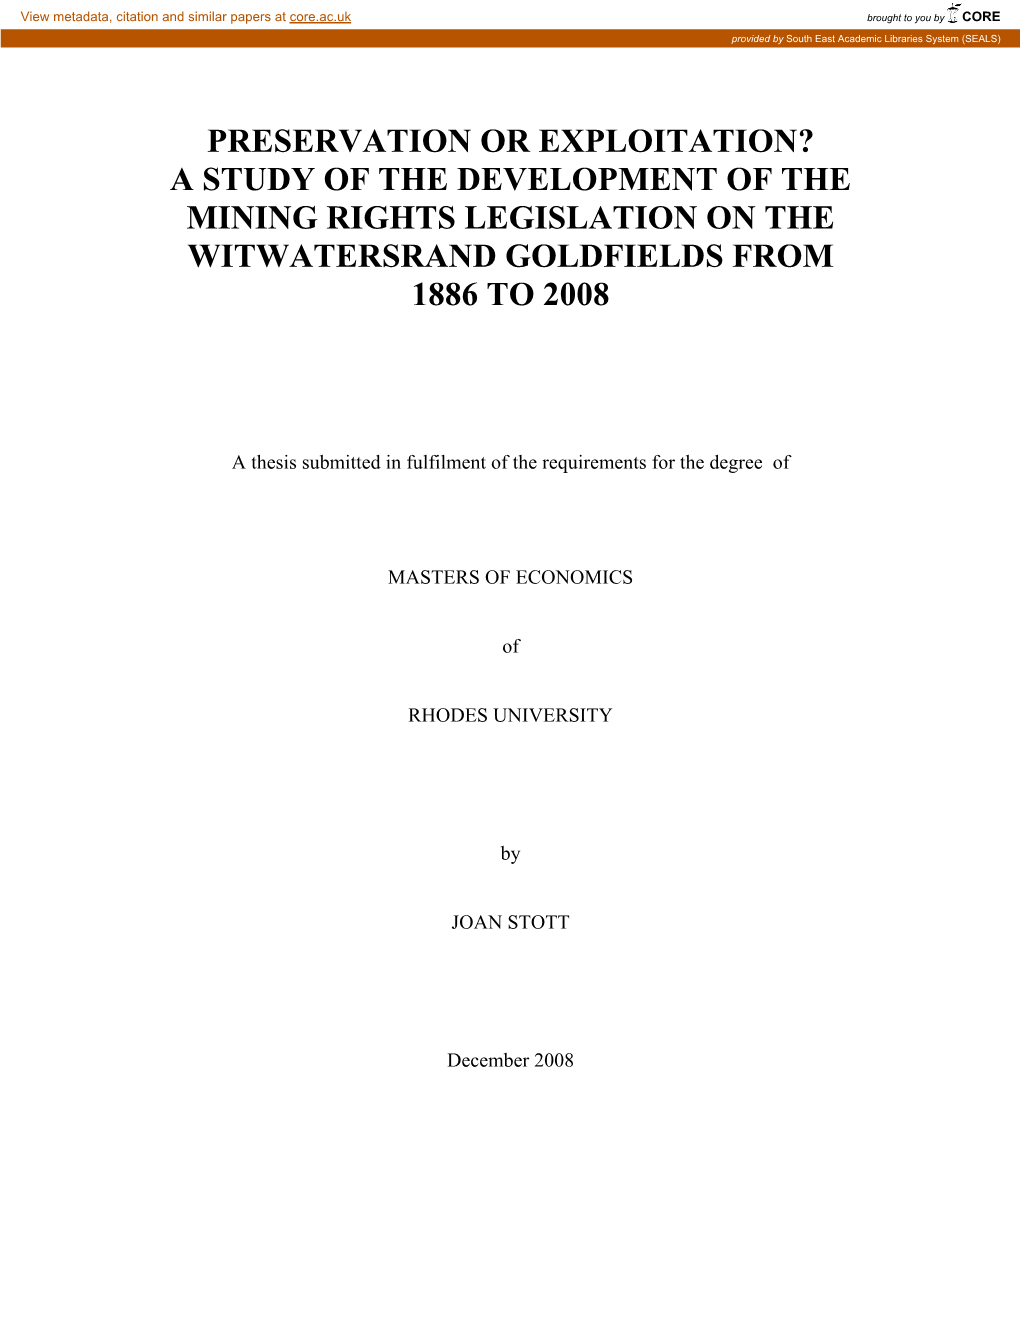 Preservation Or Exploitation? a Study of the Development of the Mining Rights Legislation on the Witwatersrand Goldfields from 1886 to 2008